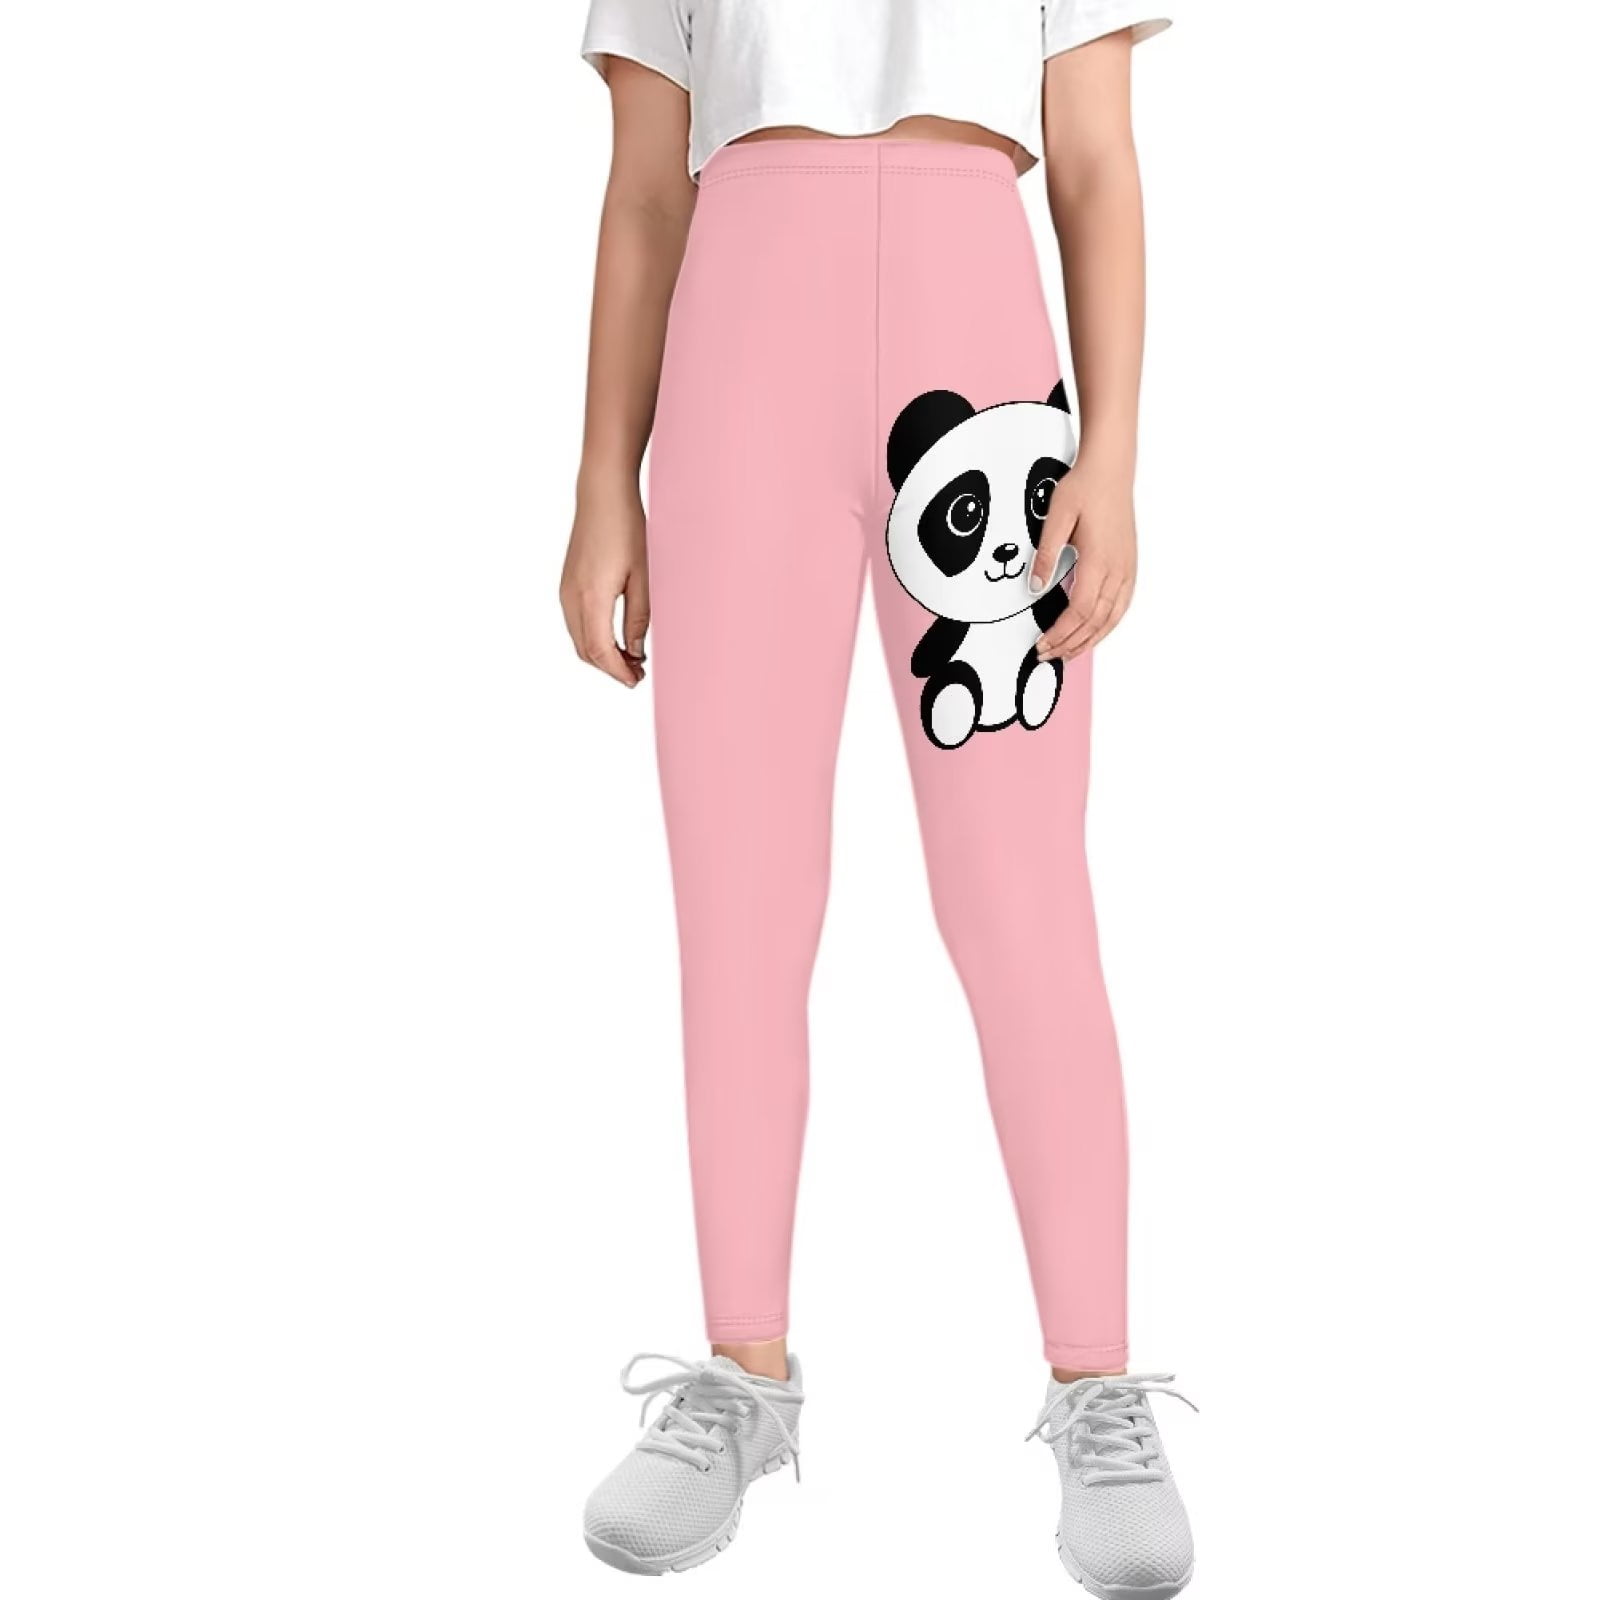 FKELYI Girls Leggings Pink with Panda Print Size 12-13 Years Comfortable  School Yoga Pants High Waisted Straight Leg Casual Home Active Tights